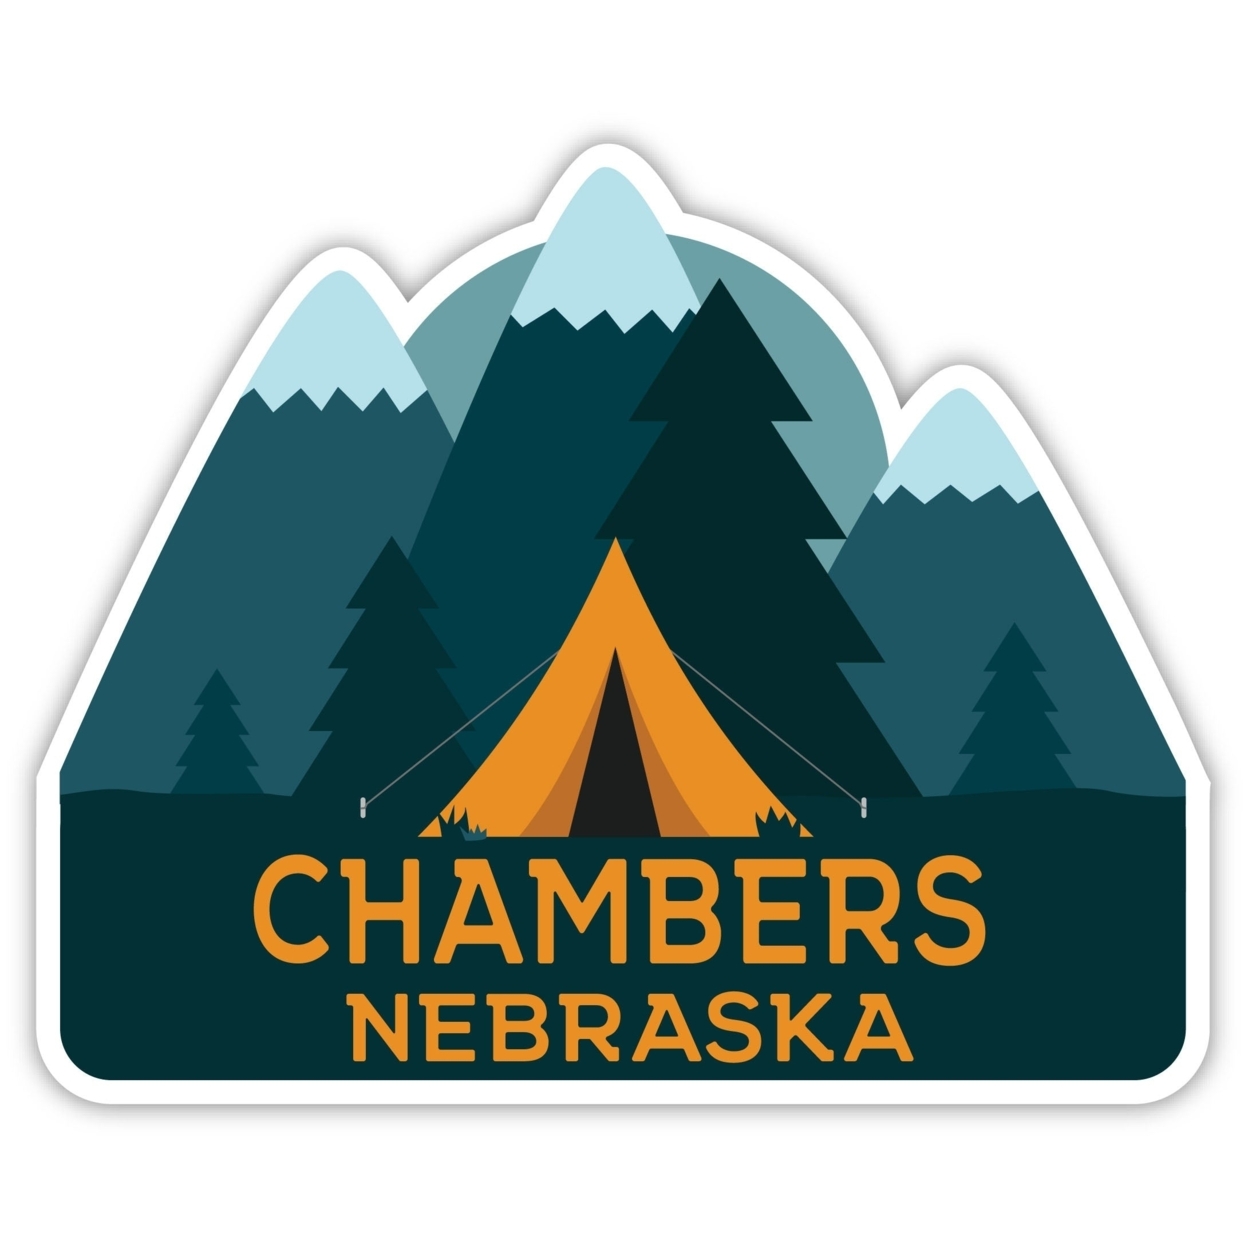 Chambers Nebraska Souvenir Decorative Stickers (Choose Theme And Size) - 4-Pack, 2-Inch, Tent